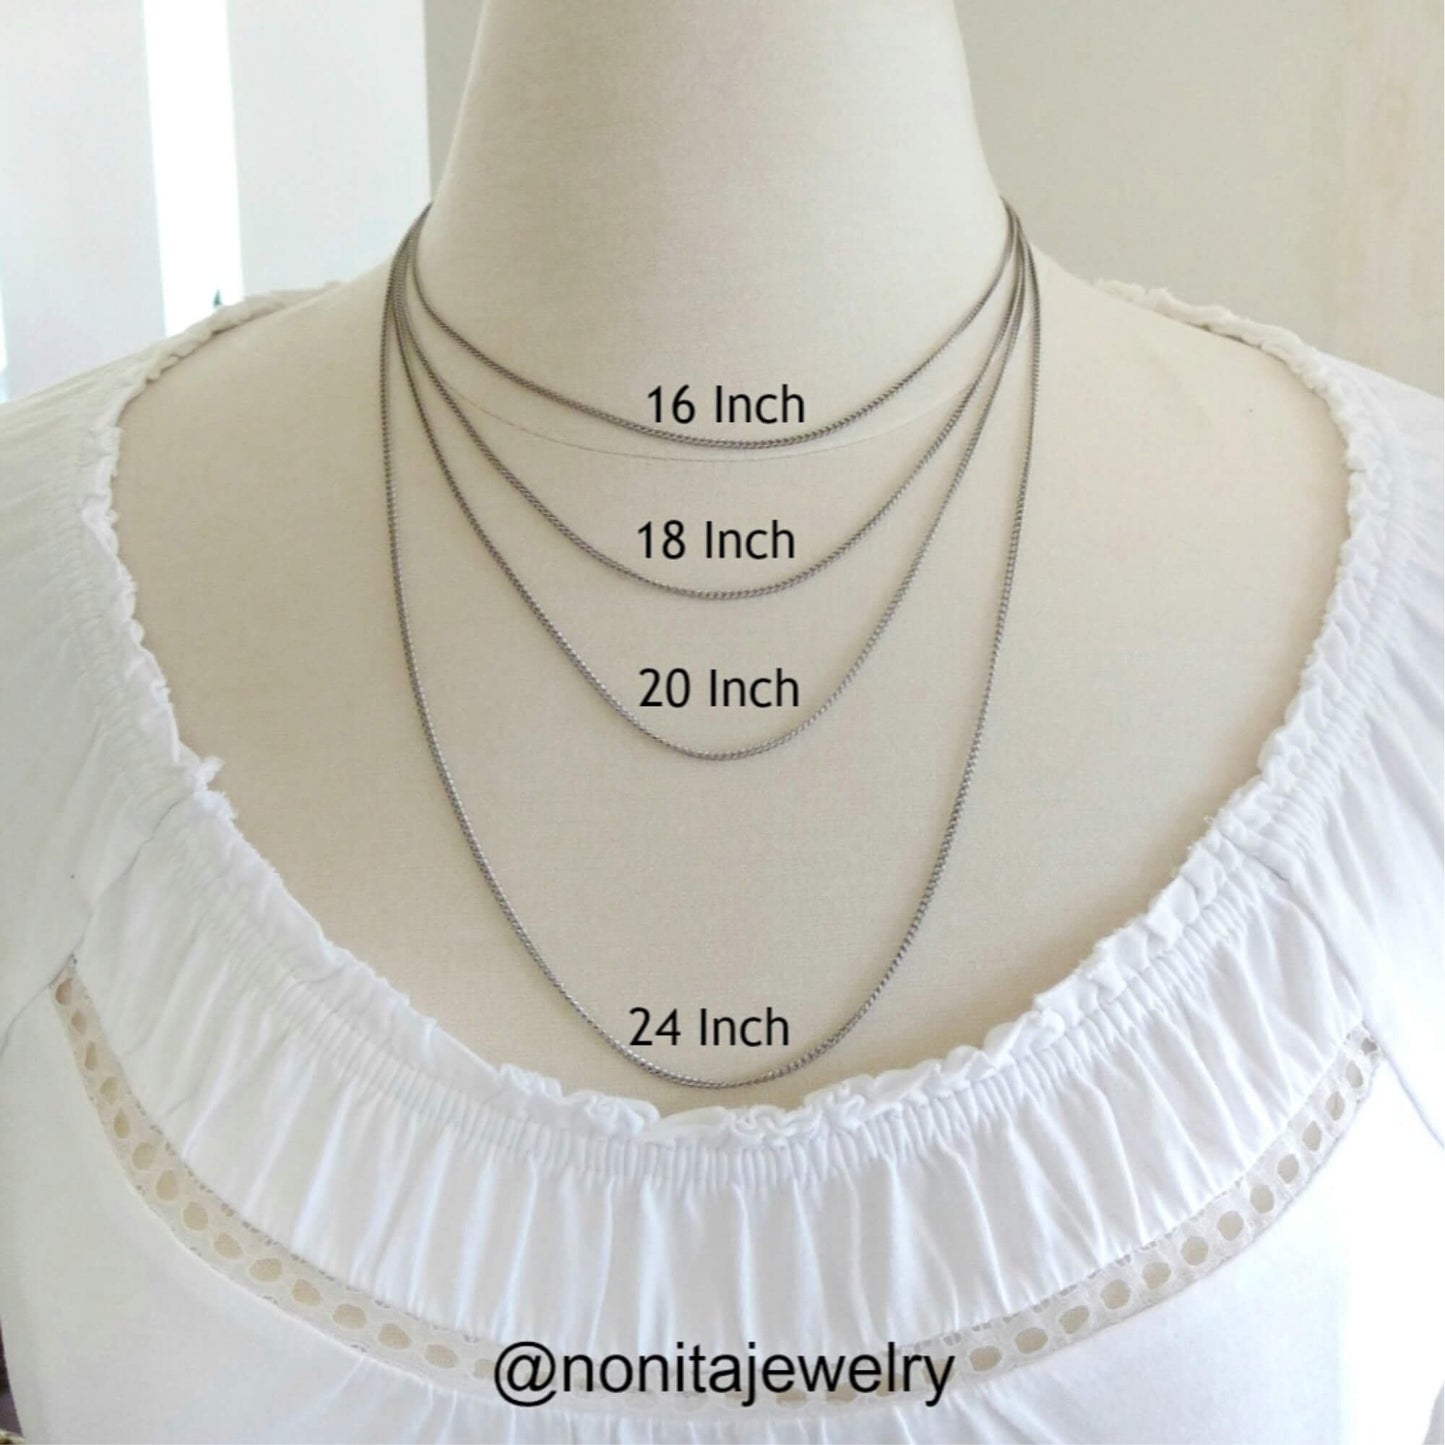 Necklace Lengths for Nonita Jewelry Necklaces